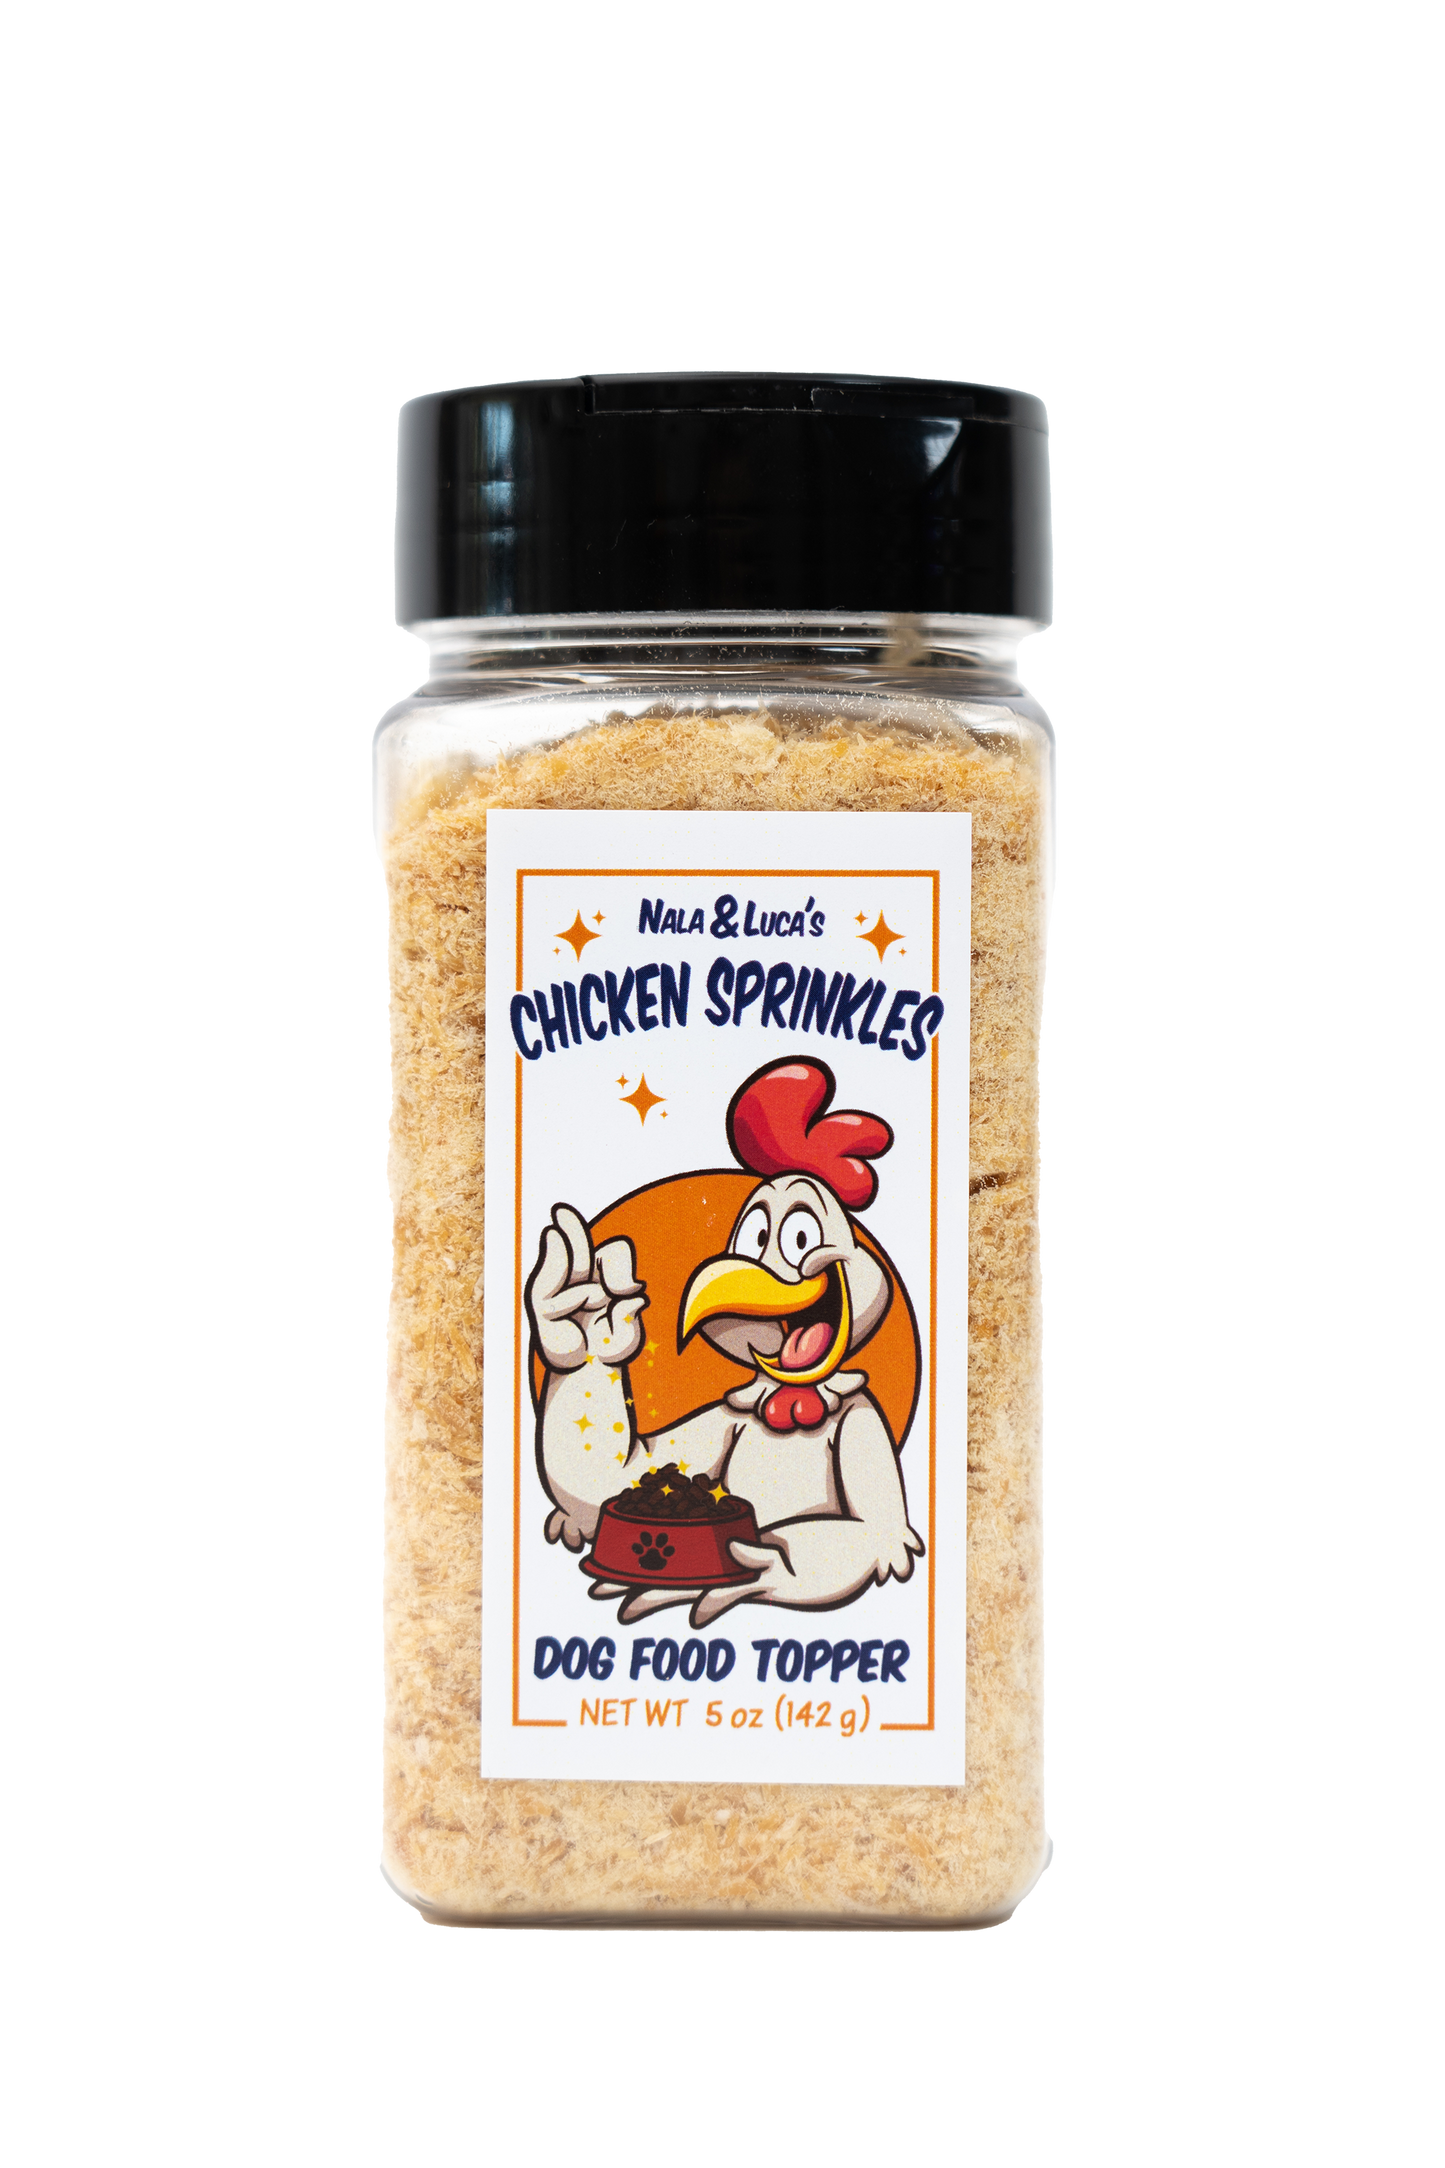 Nala & Luca's Chicken Sprinkles - Food Topper for Dogs & Cats 5oz. "The 1 Pack"